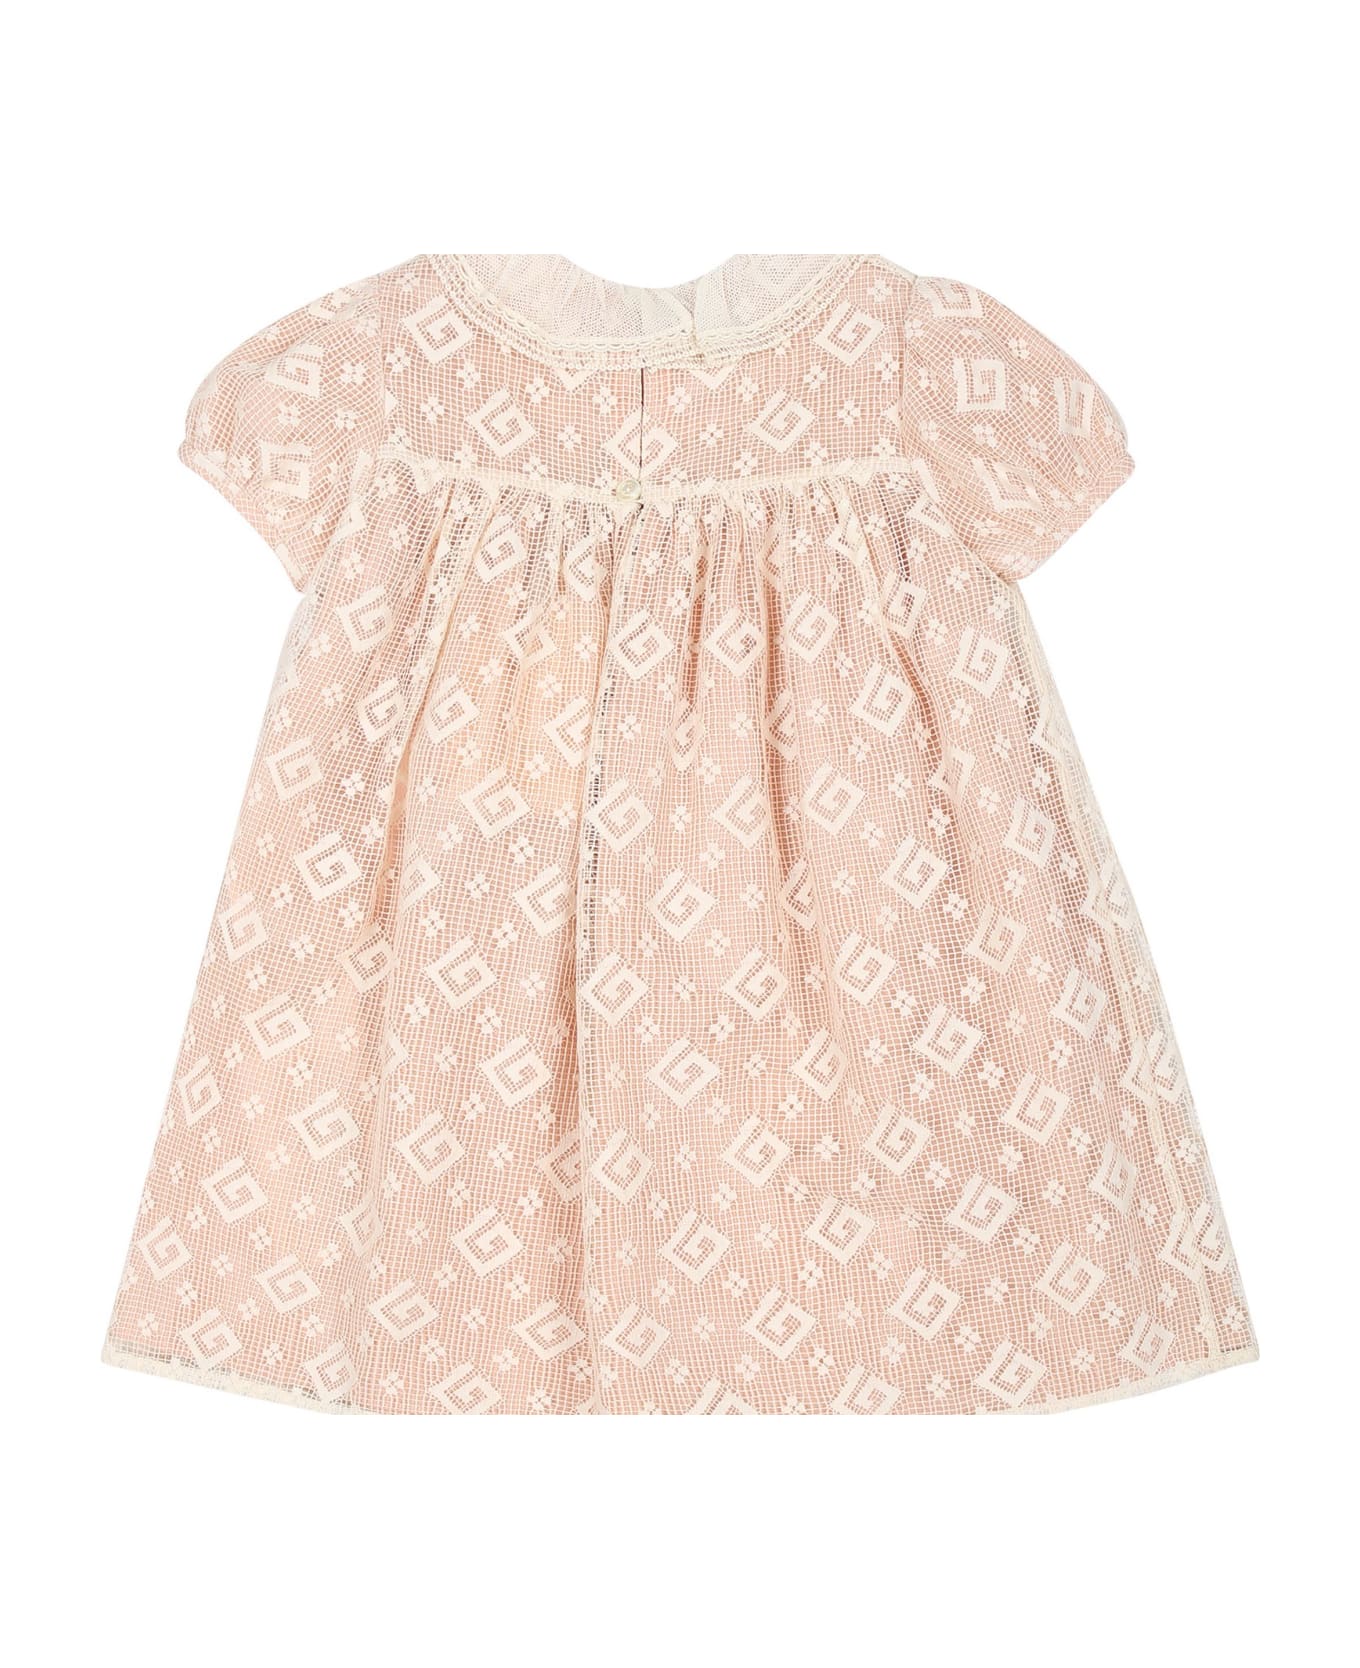 Gucci Pink Dress For Baby Girl With G Quadro Motif - Pink ウェア